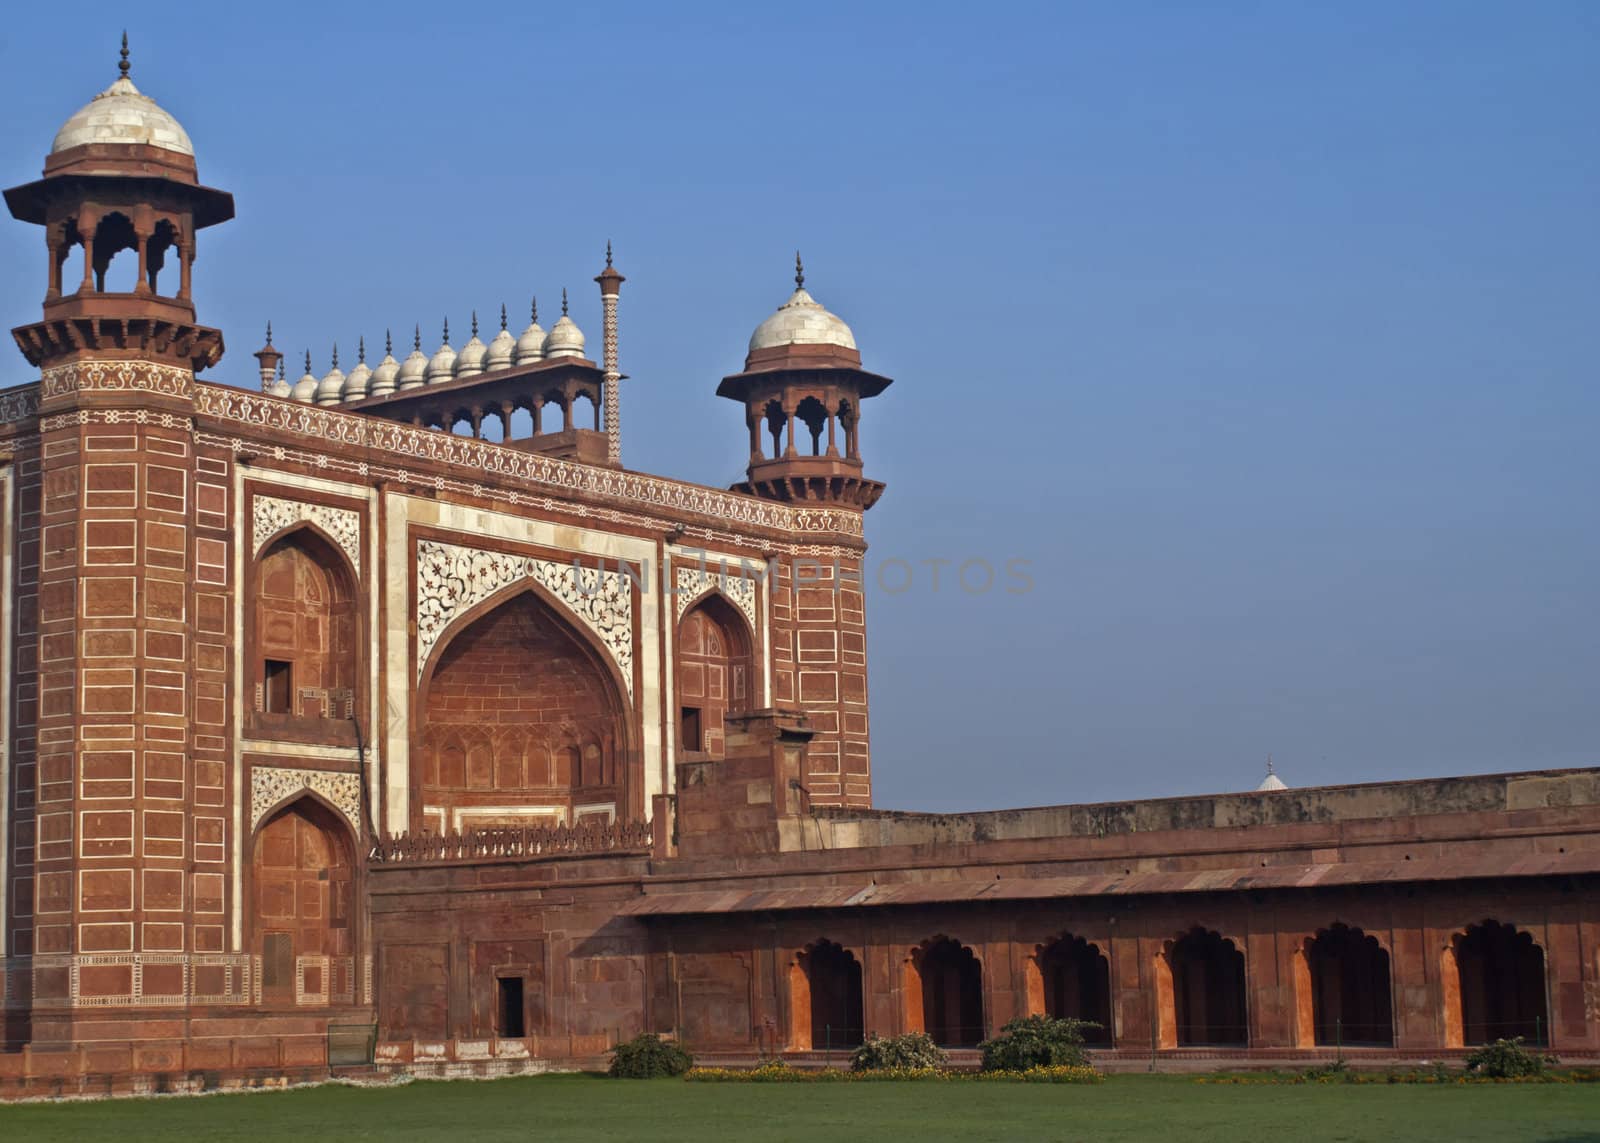 Massive Entrance Gate to Taj Mahal complex in India's Agra. by Claudine